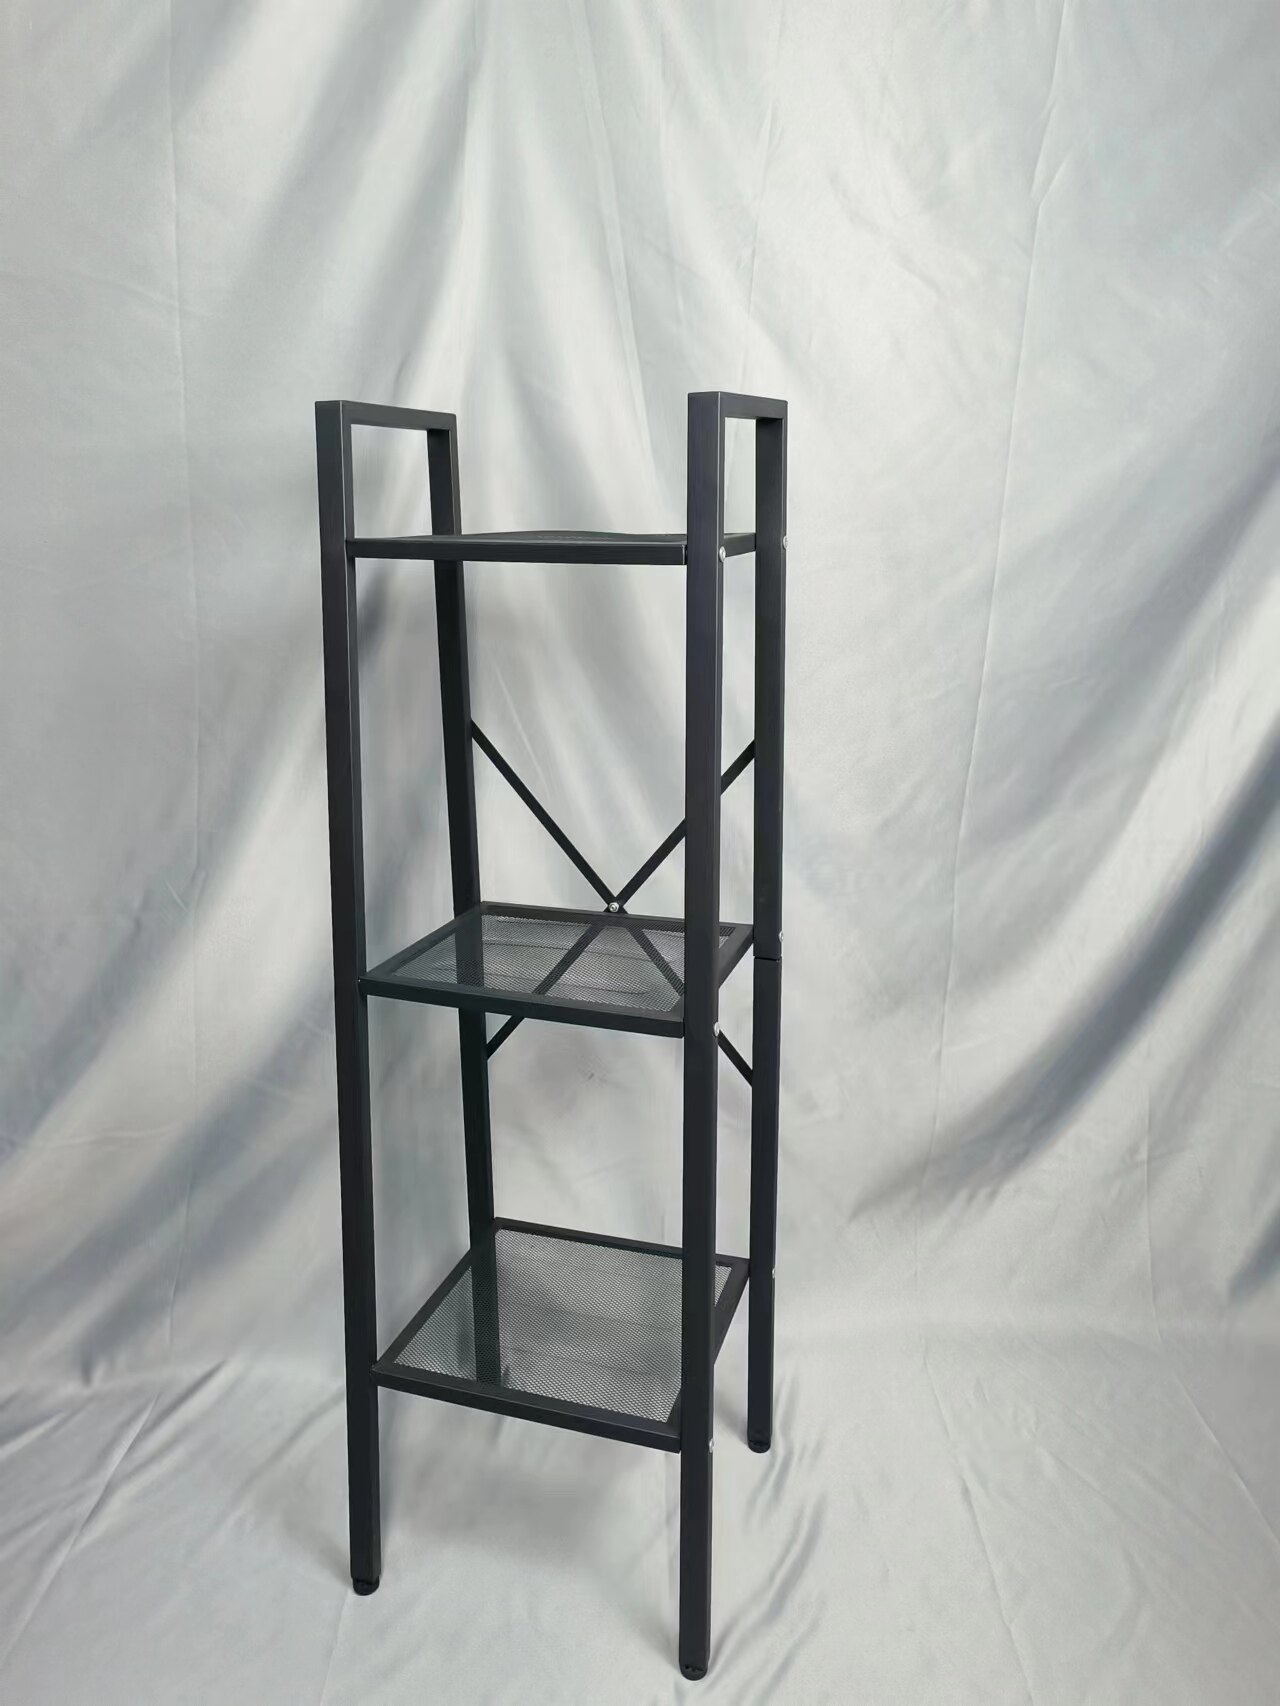 Top Kitchen Steel Storage Rack Suppliers for Organizing Your Space